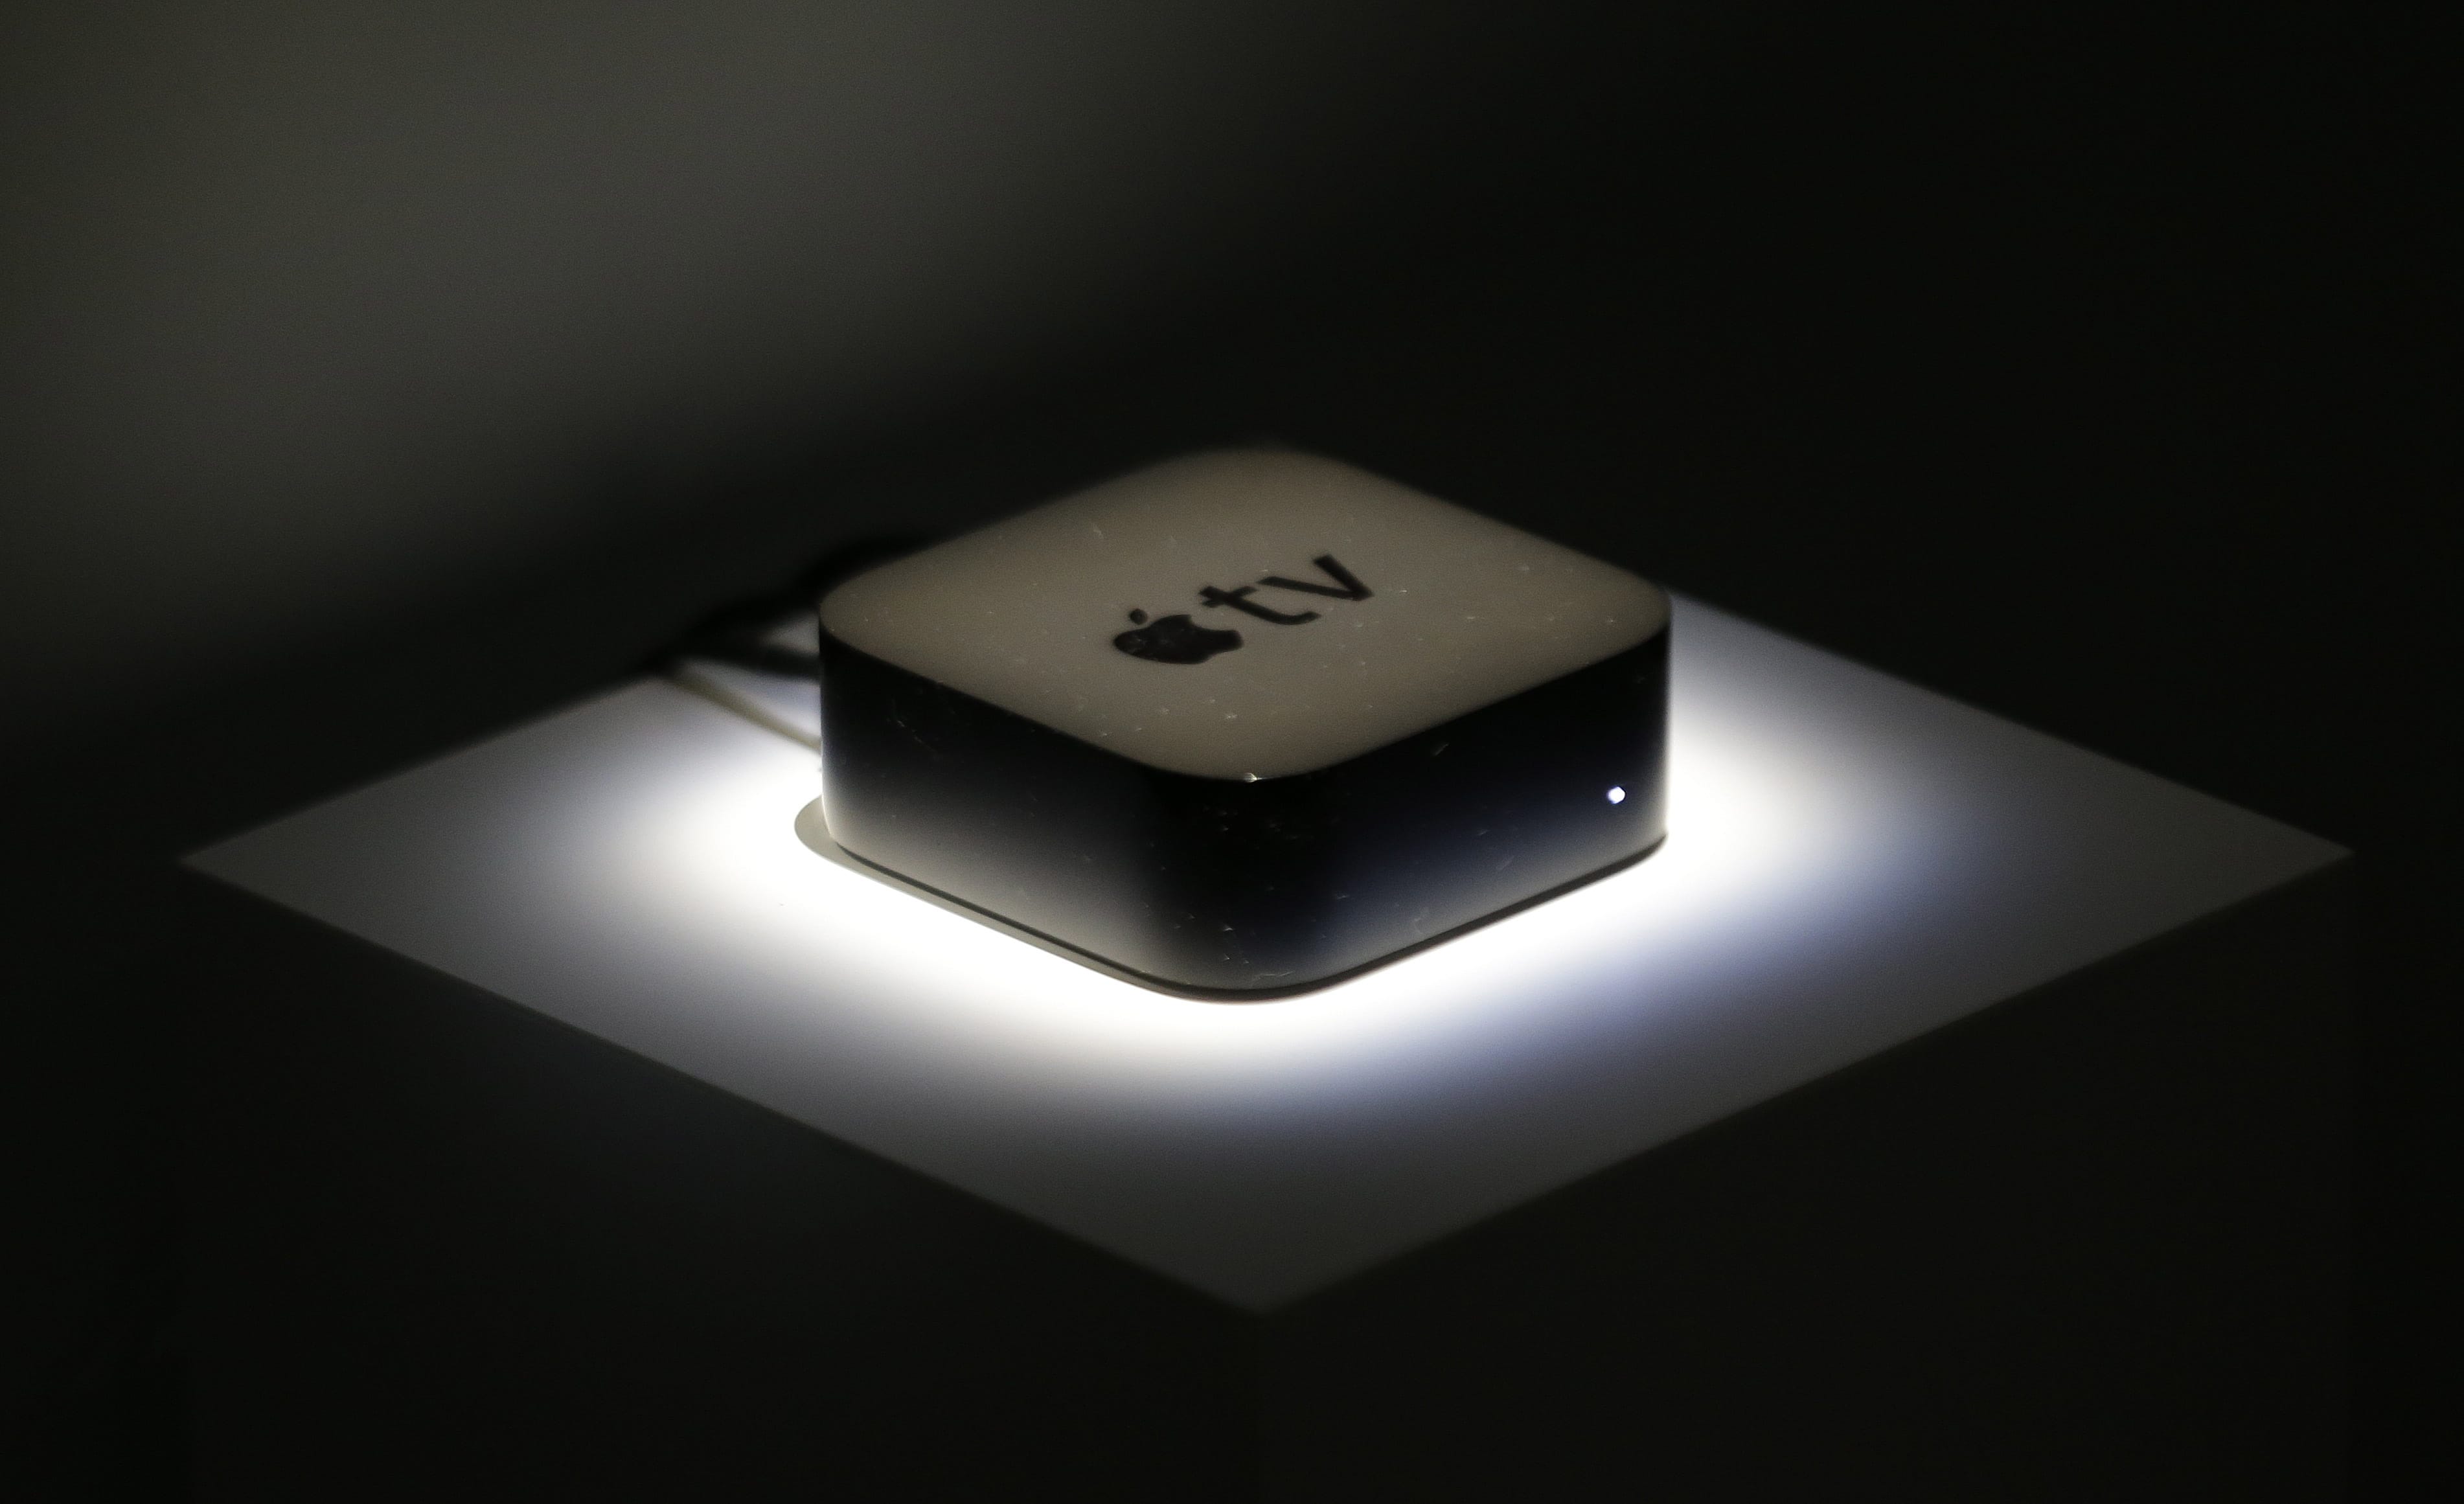 The new Apple TV box is shown during a product display following an Apple event Wednesday in San Francisco. Apple staked a new claim to the living room on Wednesday, as the maker of iPhones and other hand-held gadgets unveiled an Internet TV system that's designed as a beachhead for the tech giant's broader ambitions to deliver a wide range of information, games, music and video to the home.